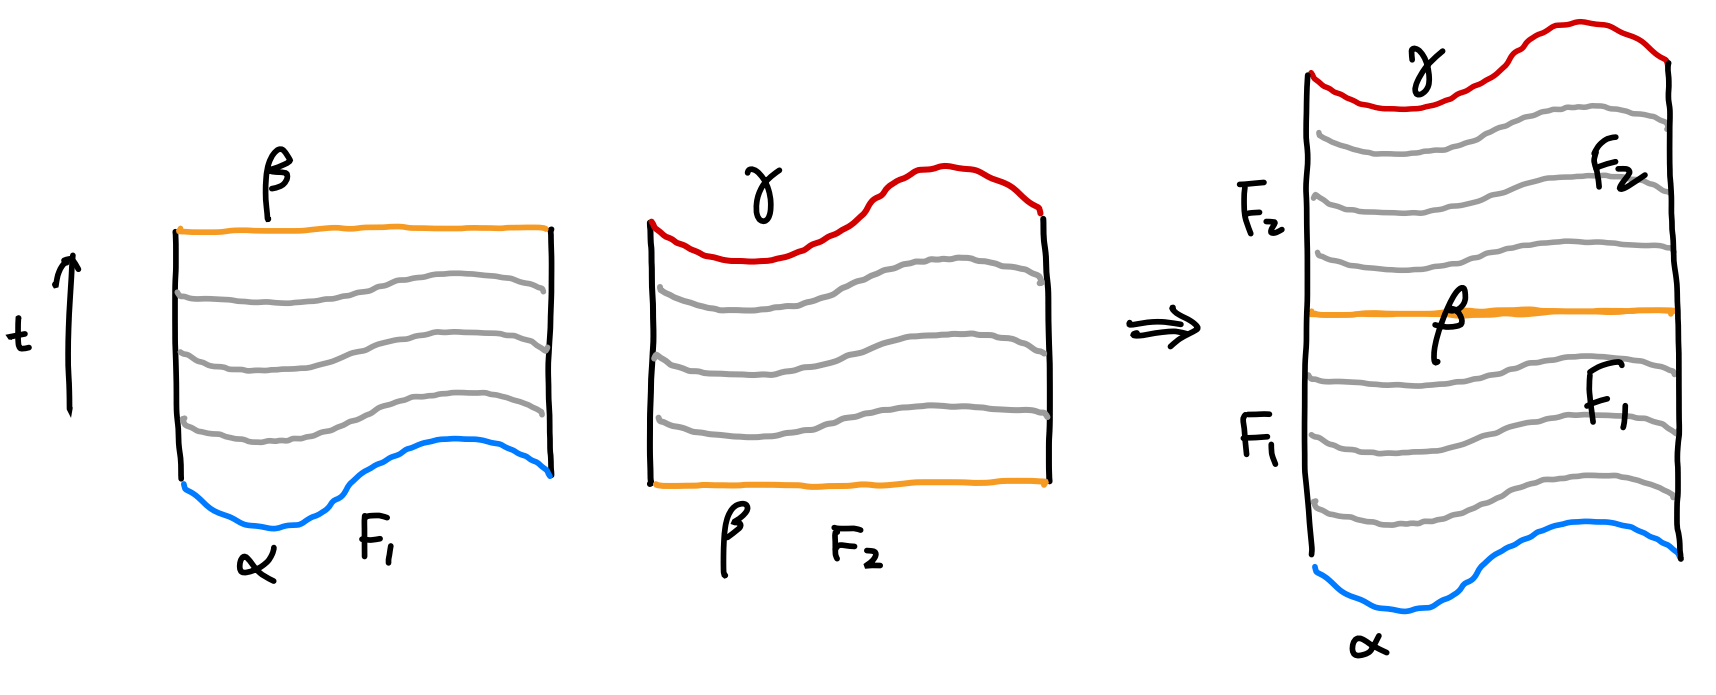 Transitivity of homotopy paths represented by F